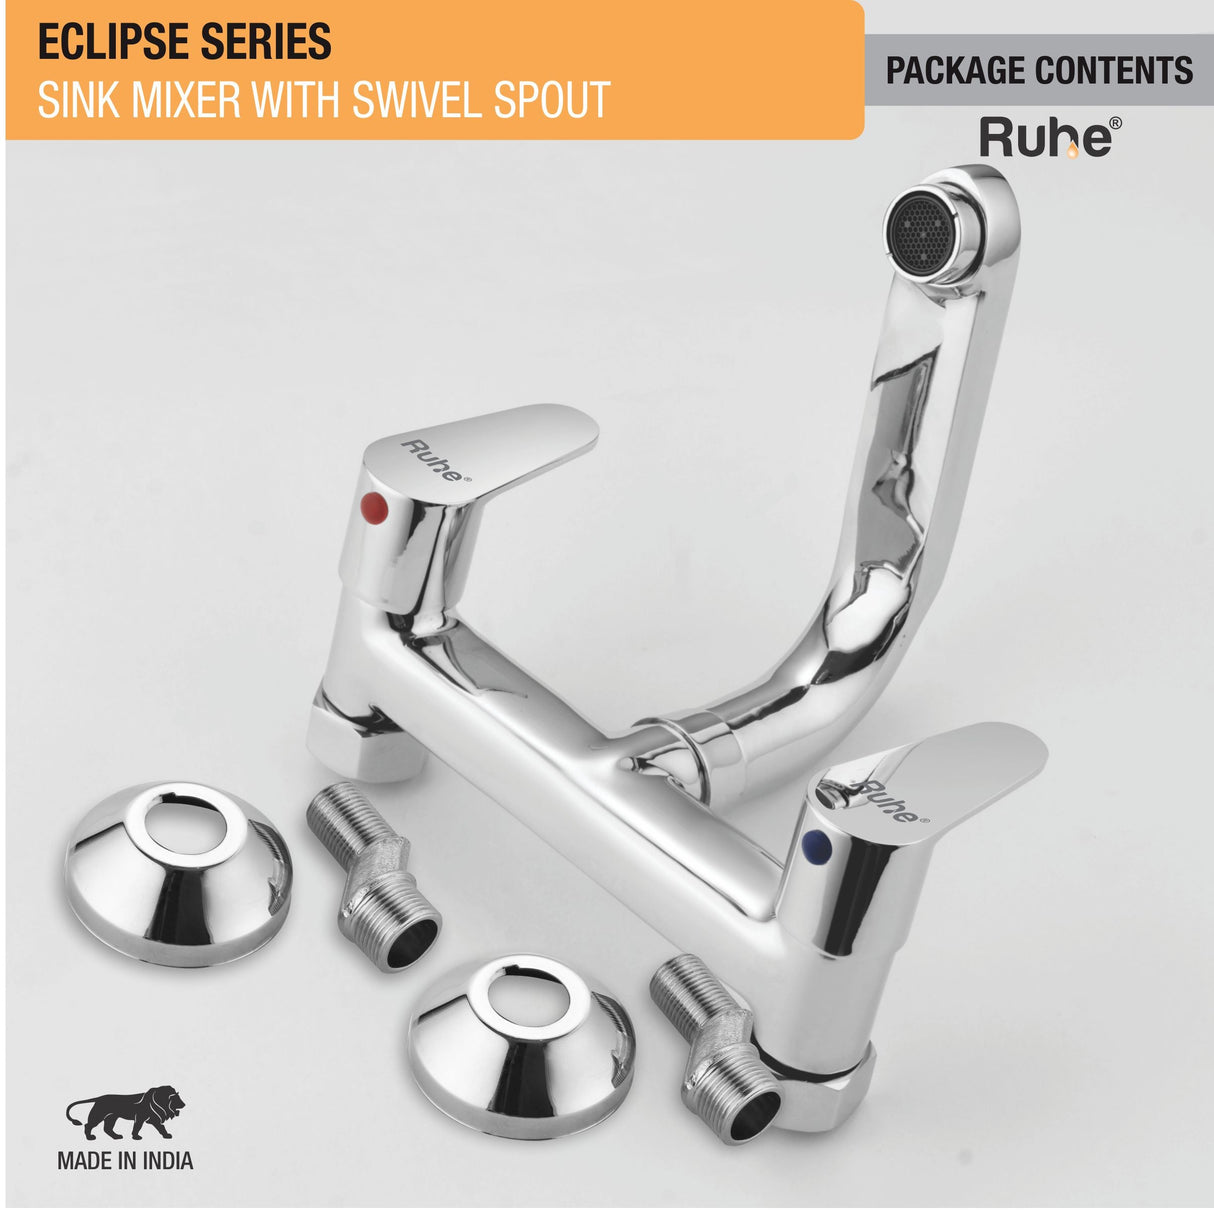 Eclipse Sink Mixer with Small (7 inches) Round Swivel Spout Faucet package content